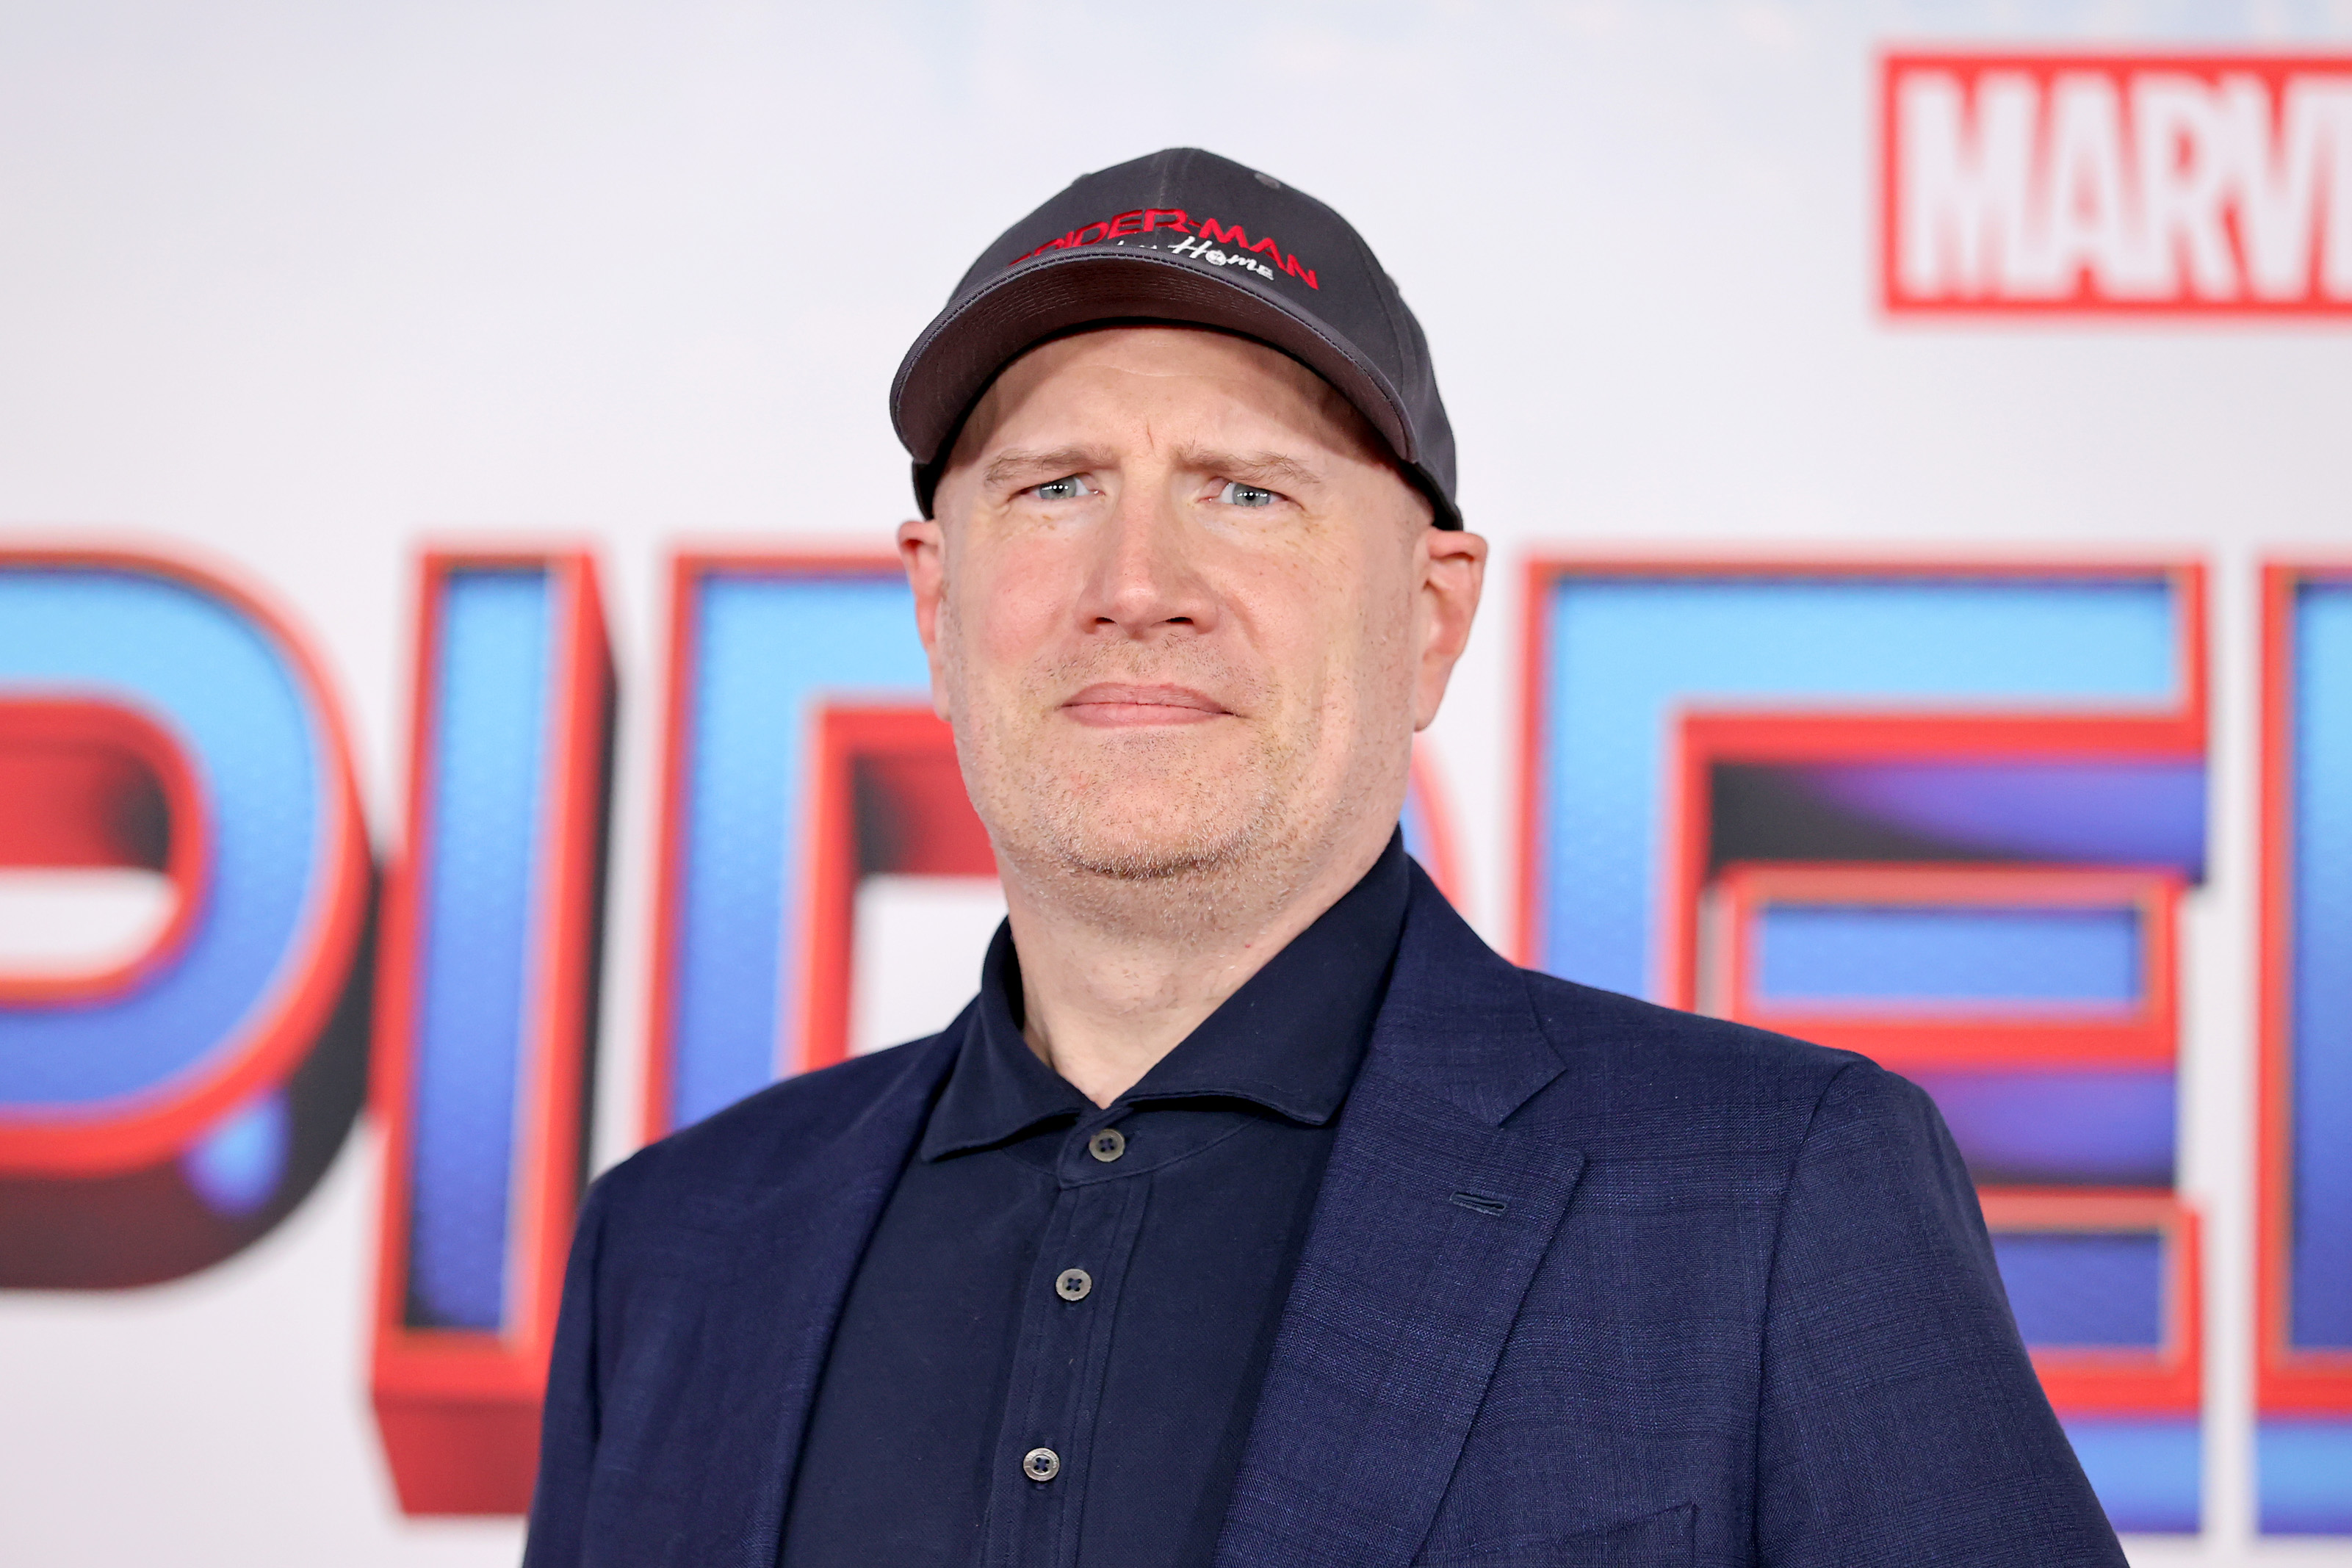 Marvel Studios President Kevin Feige wears a 'Spider-Man: No Way Home' baseball cap and a blue suit jacket over a blue button-up shirt.